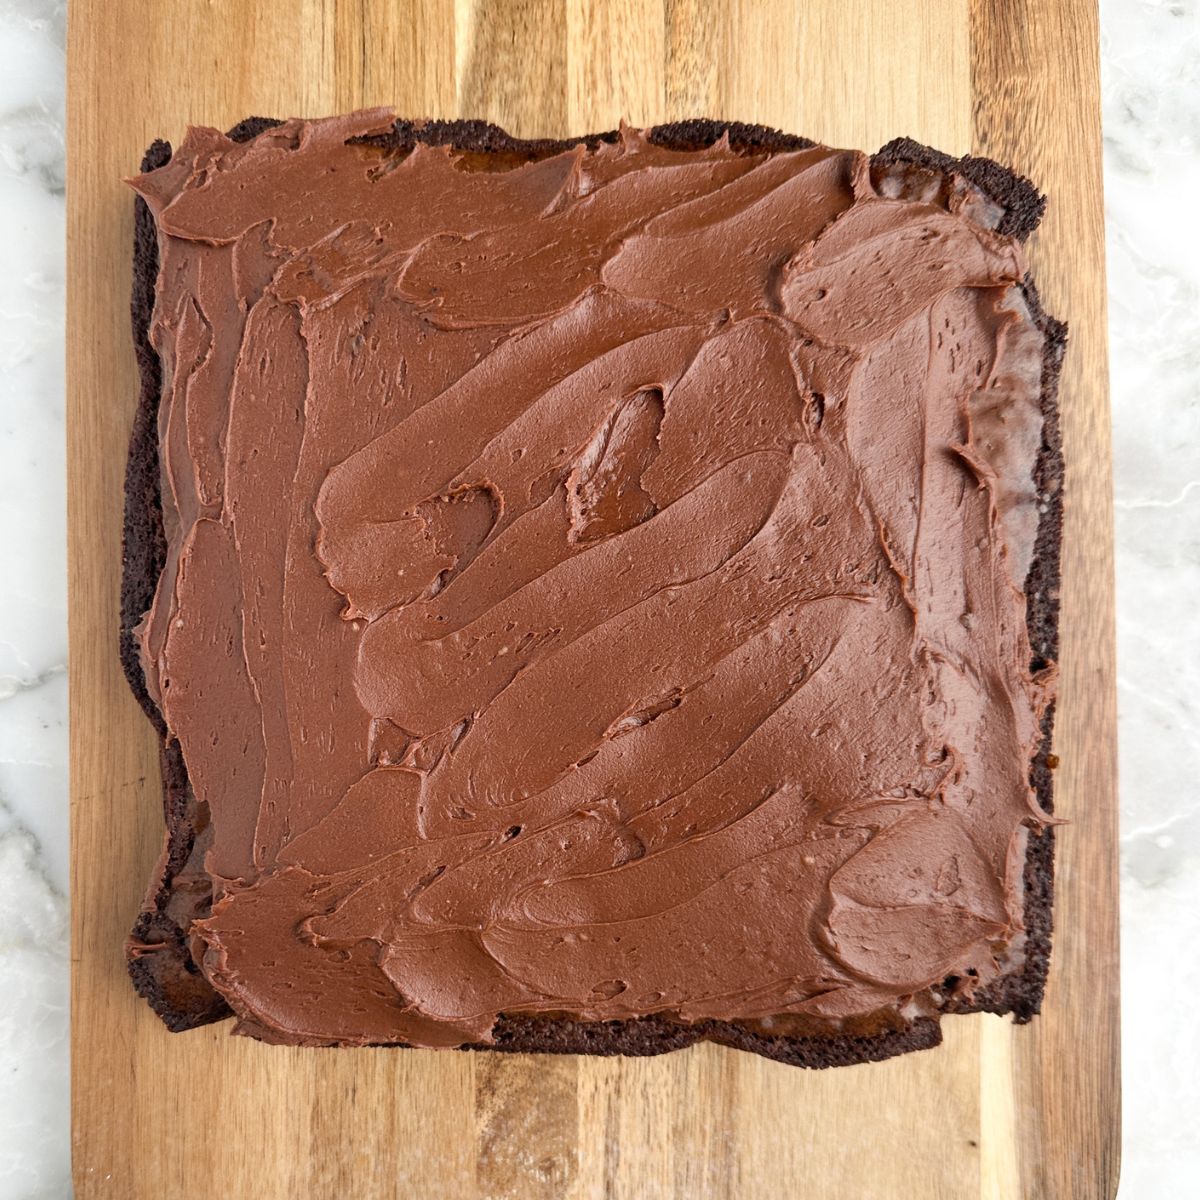 Chocolate frosting on brownies. 